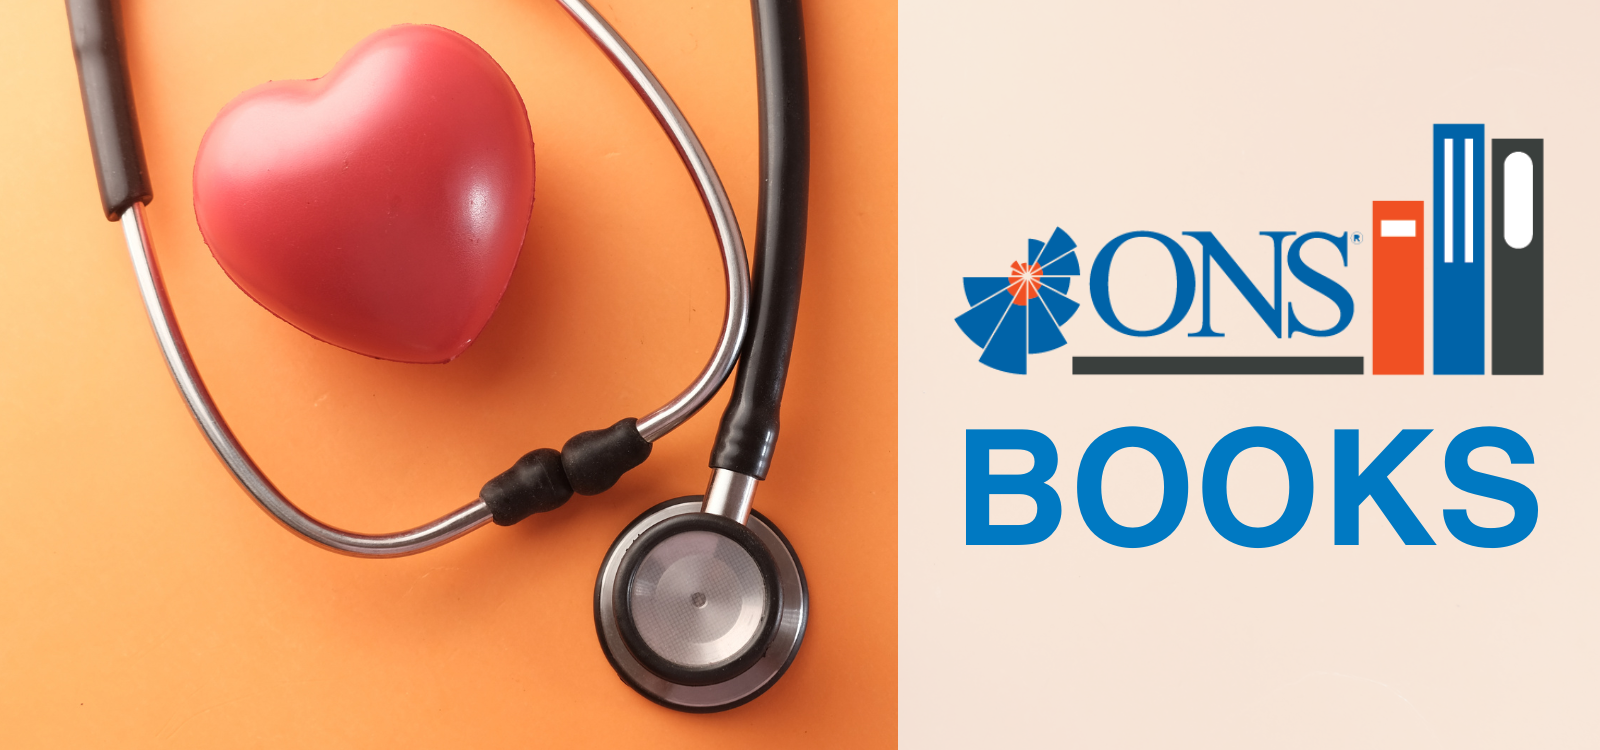 Stethoscope on left side of image with orange background, ONS logo with white background on the right side.